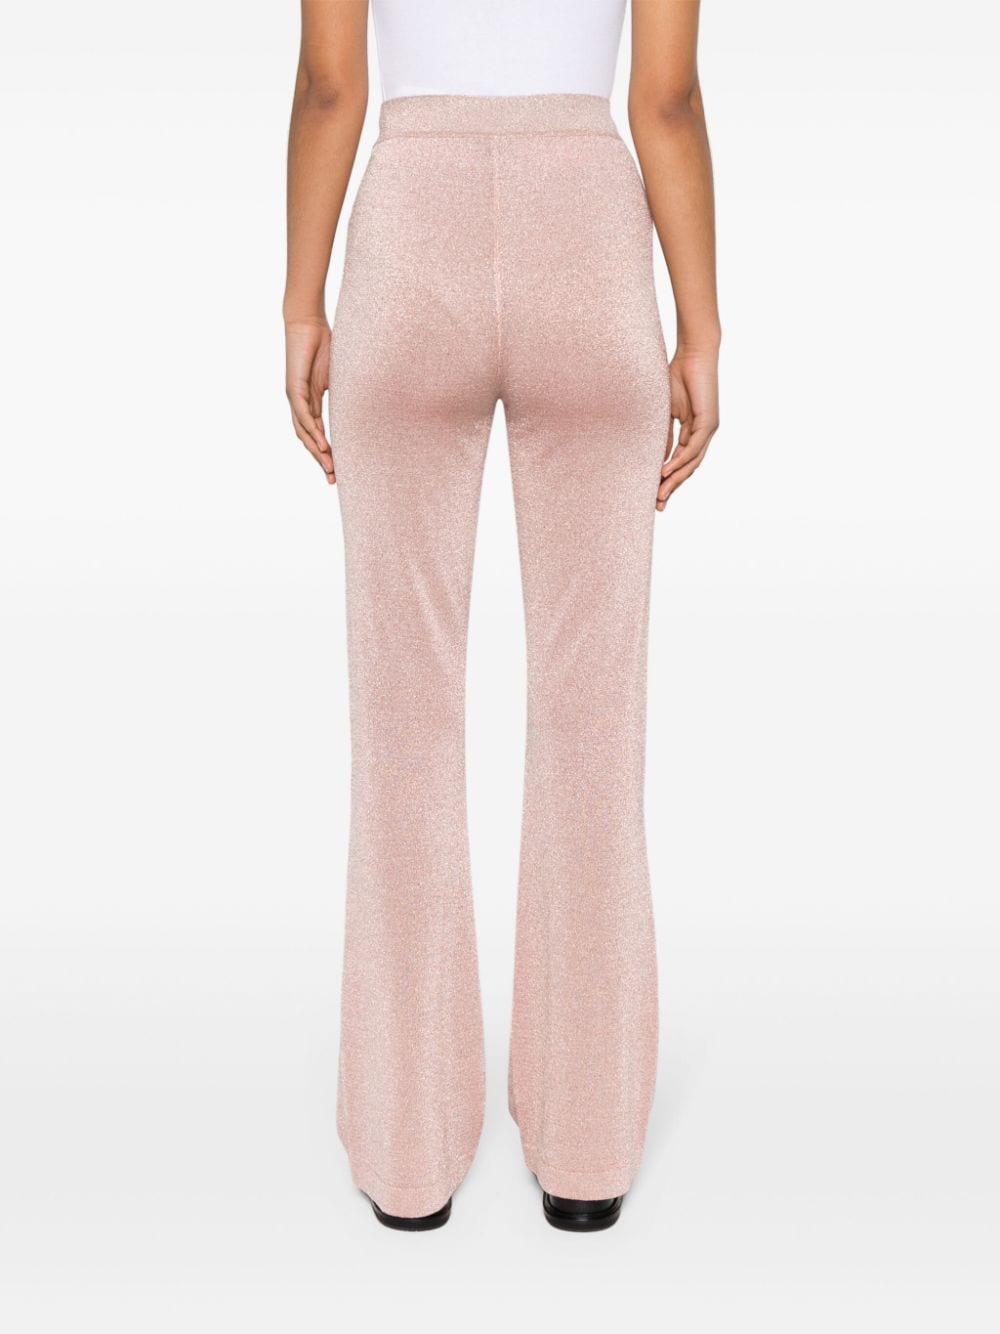 Blush Pink High-Waisted Flared Trousers for Women by Missoni